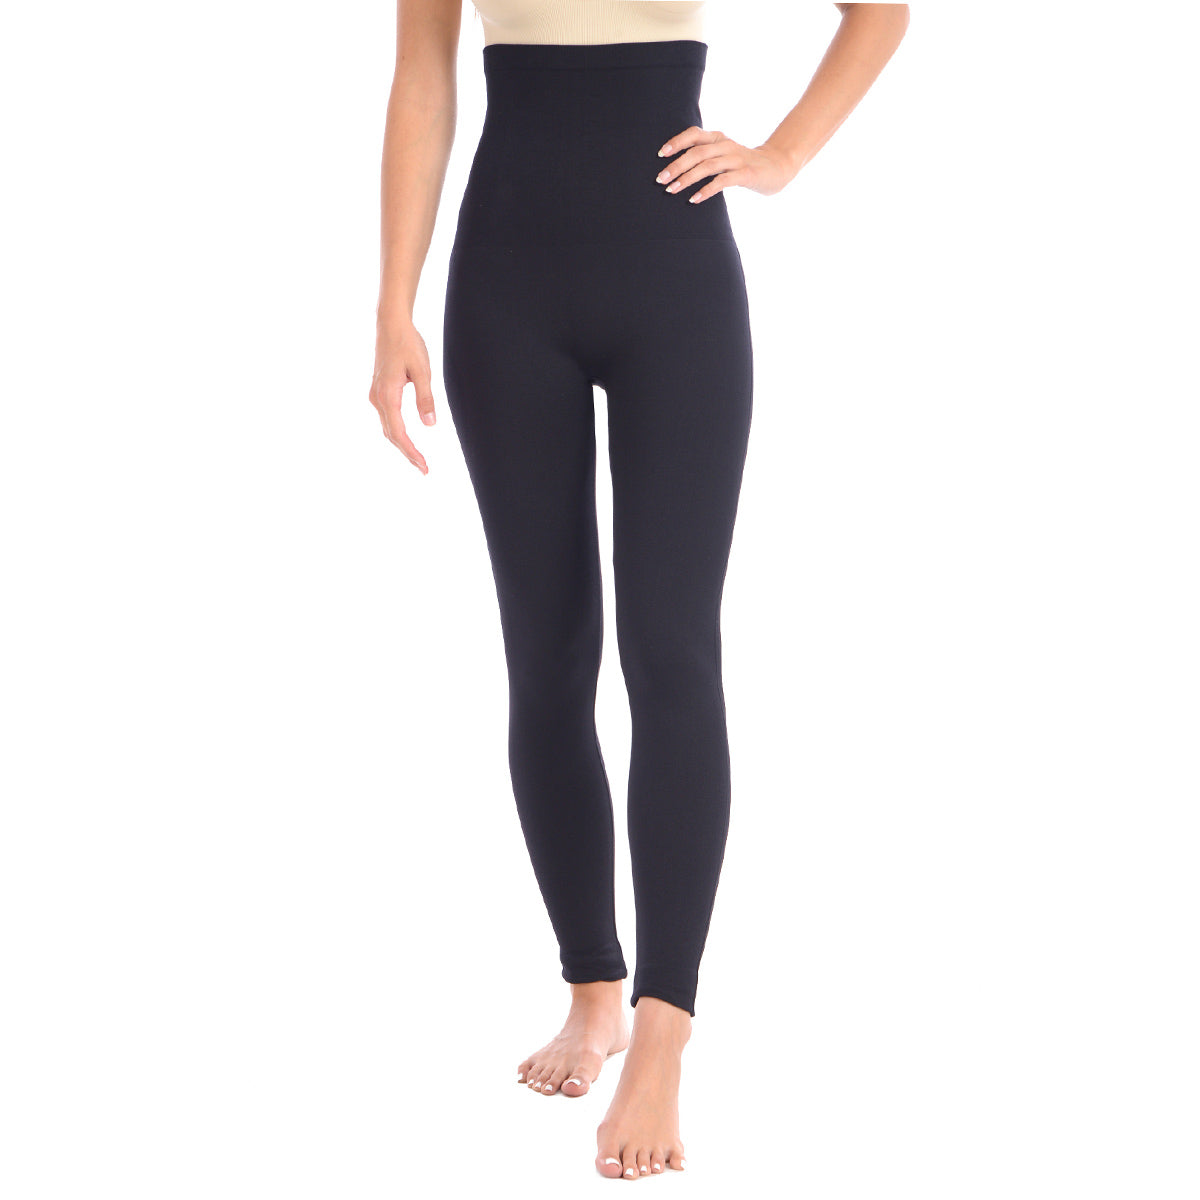 New Full Shaping legging with Double Layer 5 Waistband - Black